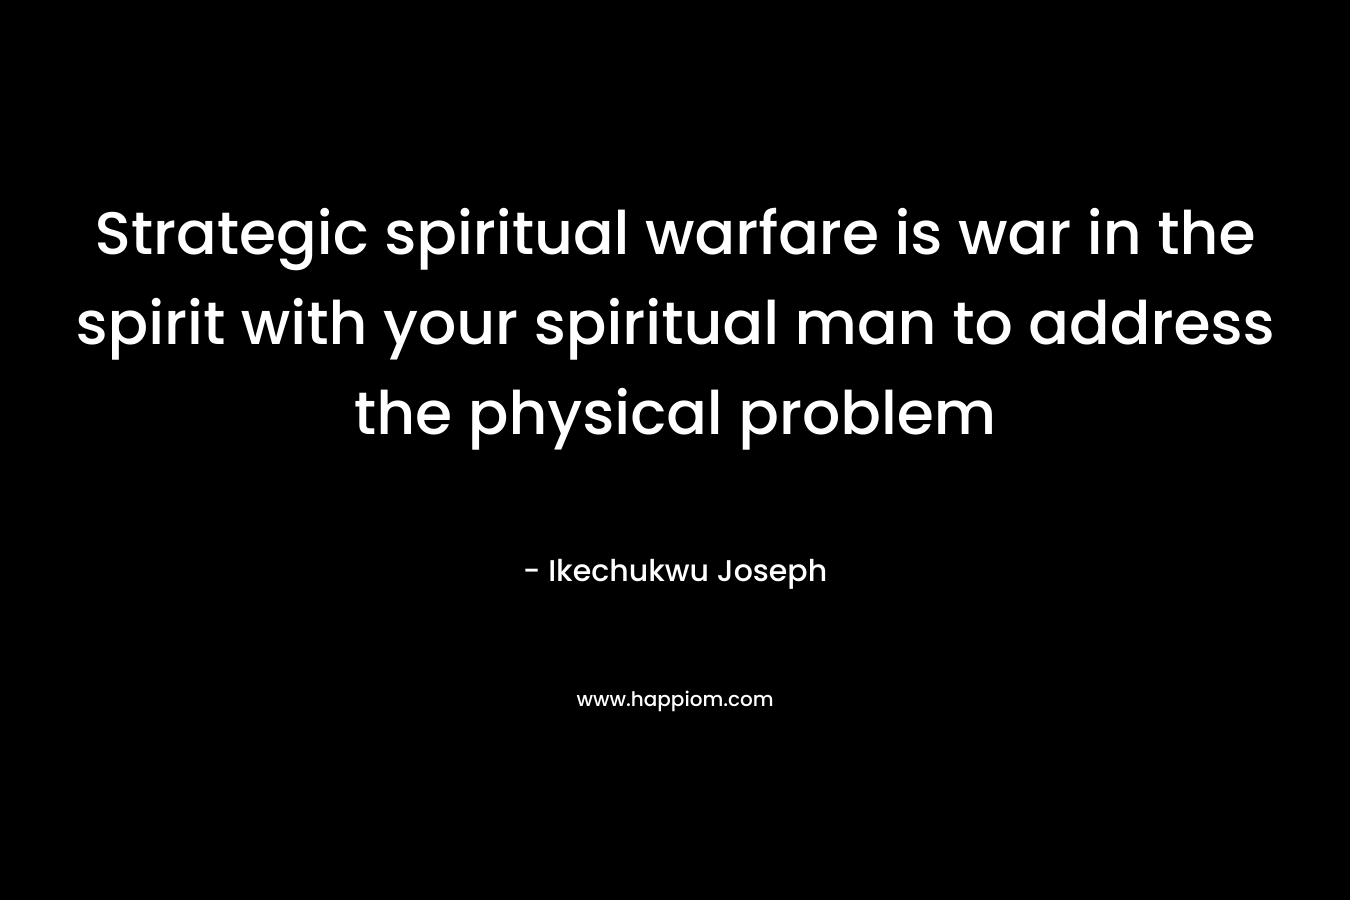 Strategic spiritual warfare is war in the spirit with your spiritual man to address the physical problem